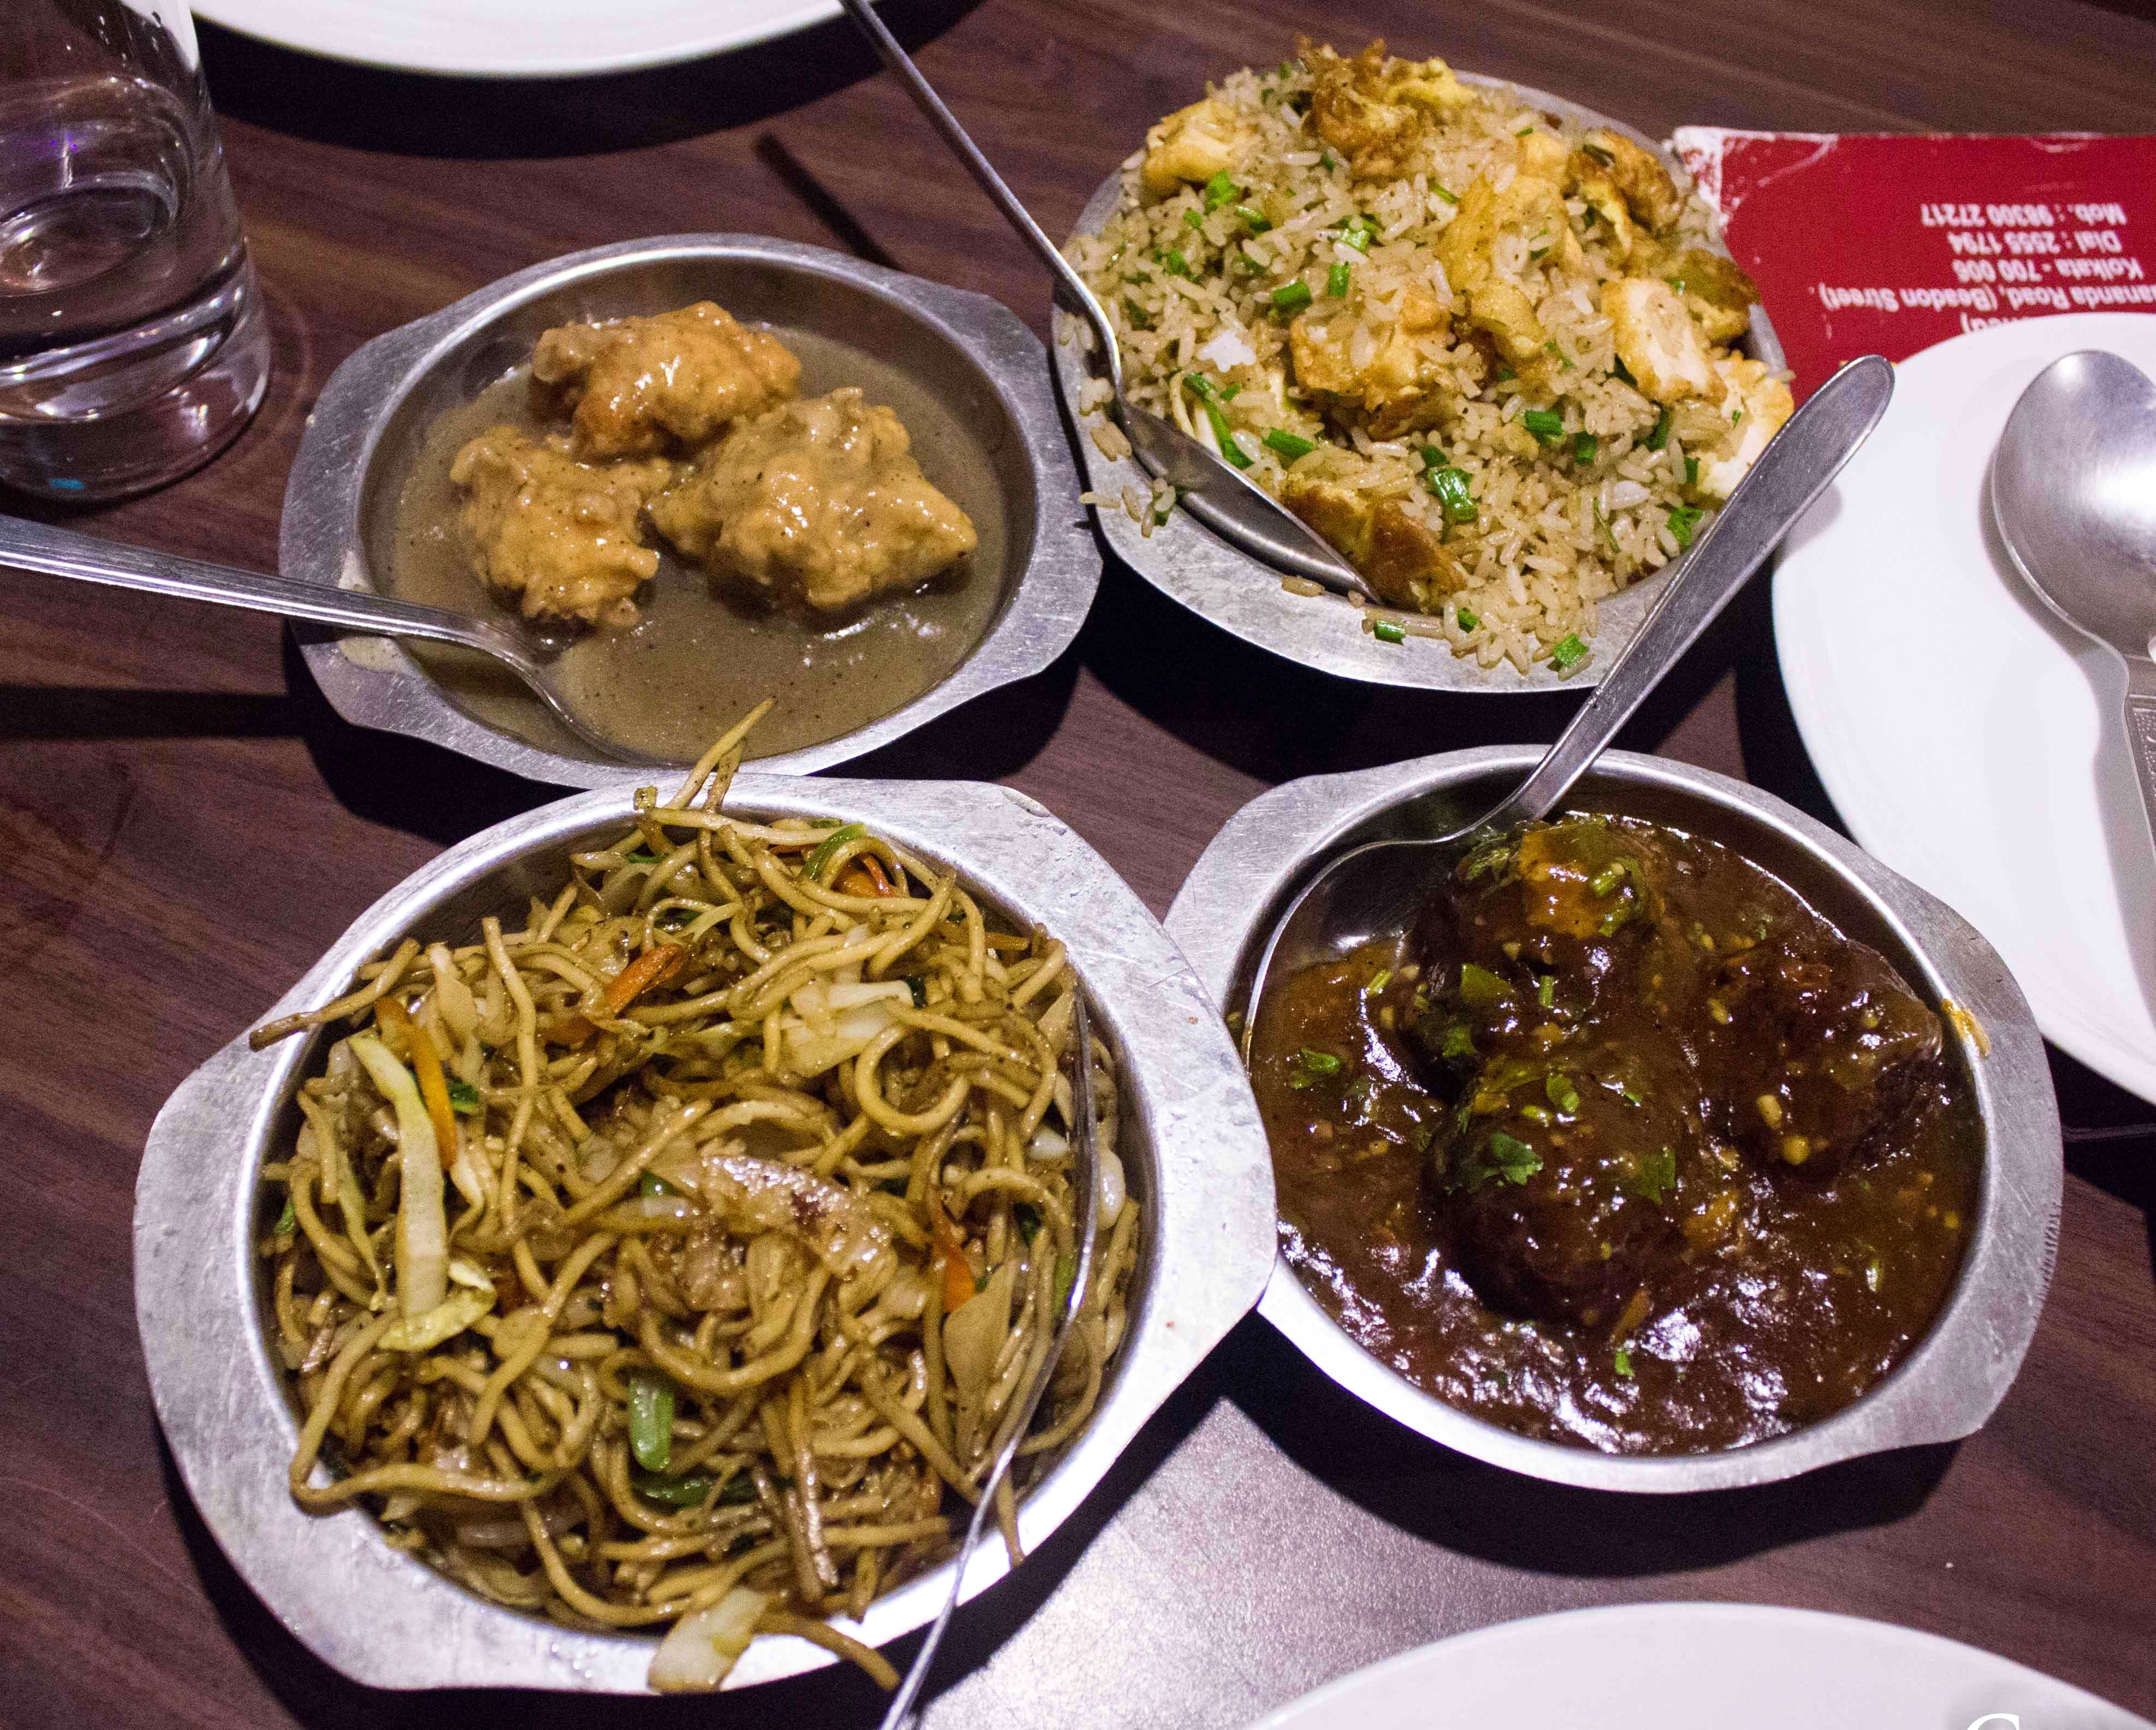 Dish,Food,Cuisine,Ingredient,Meal,Lunch,Chinese food,Produce,Pancit,Chow mein